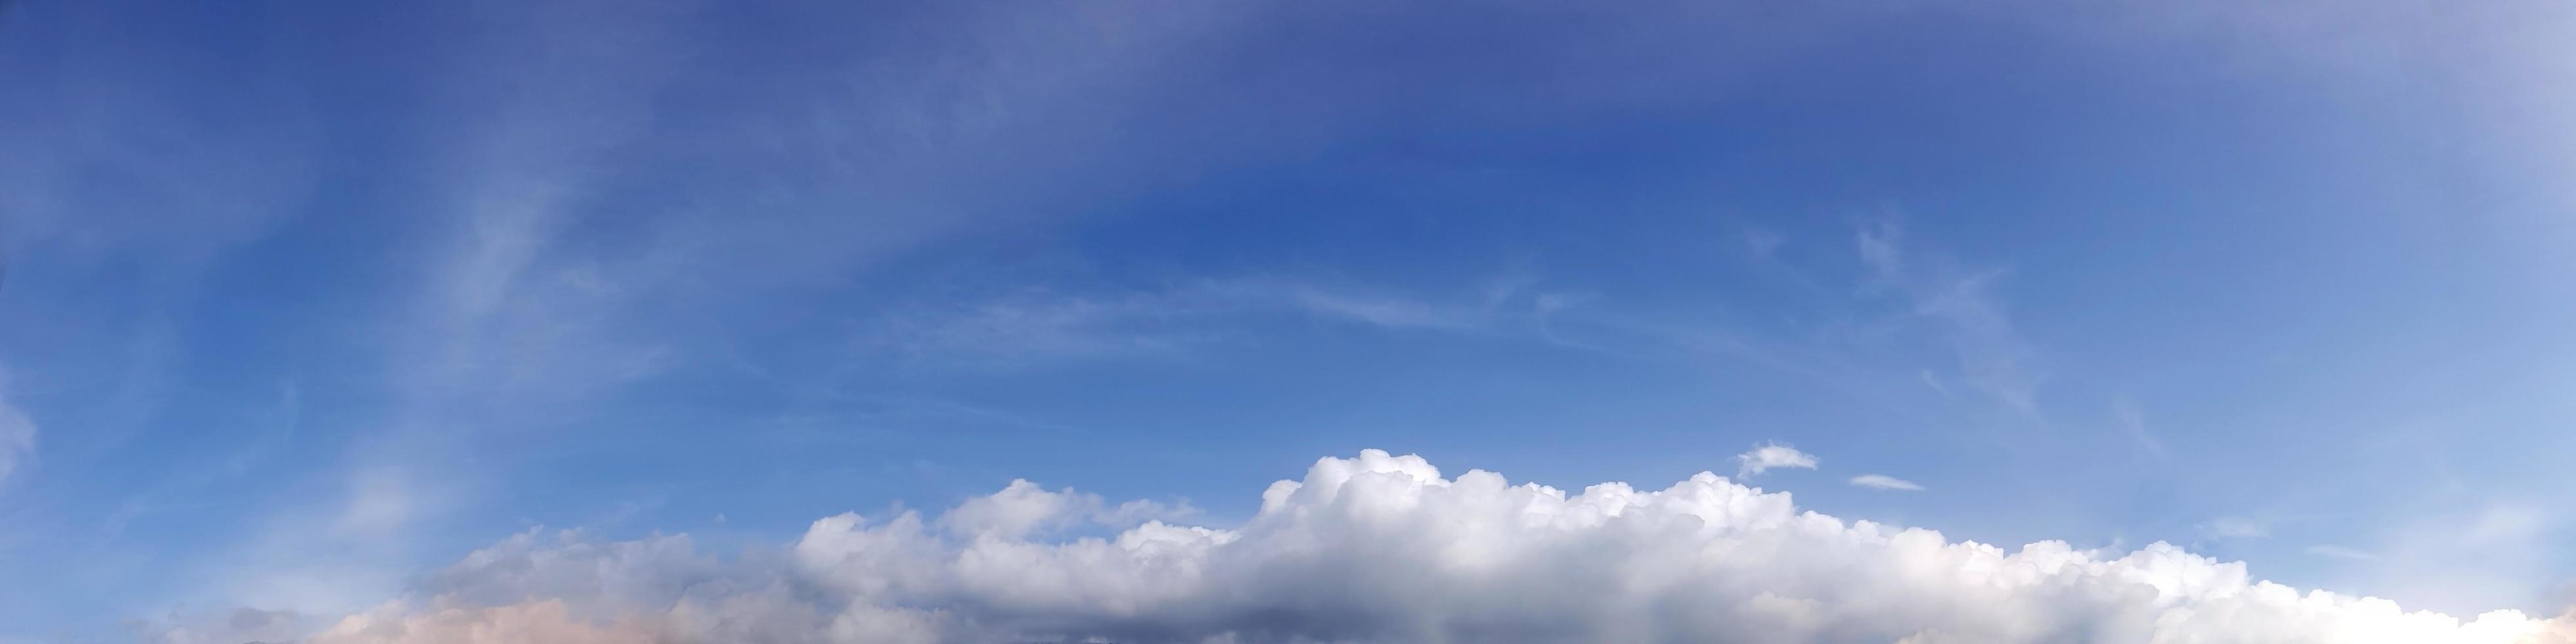 Panorama sky with cloud on a sunny day. photo